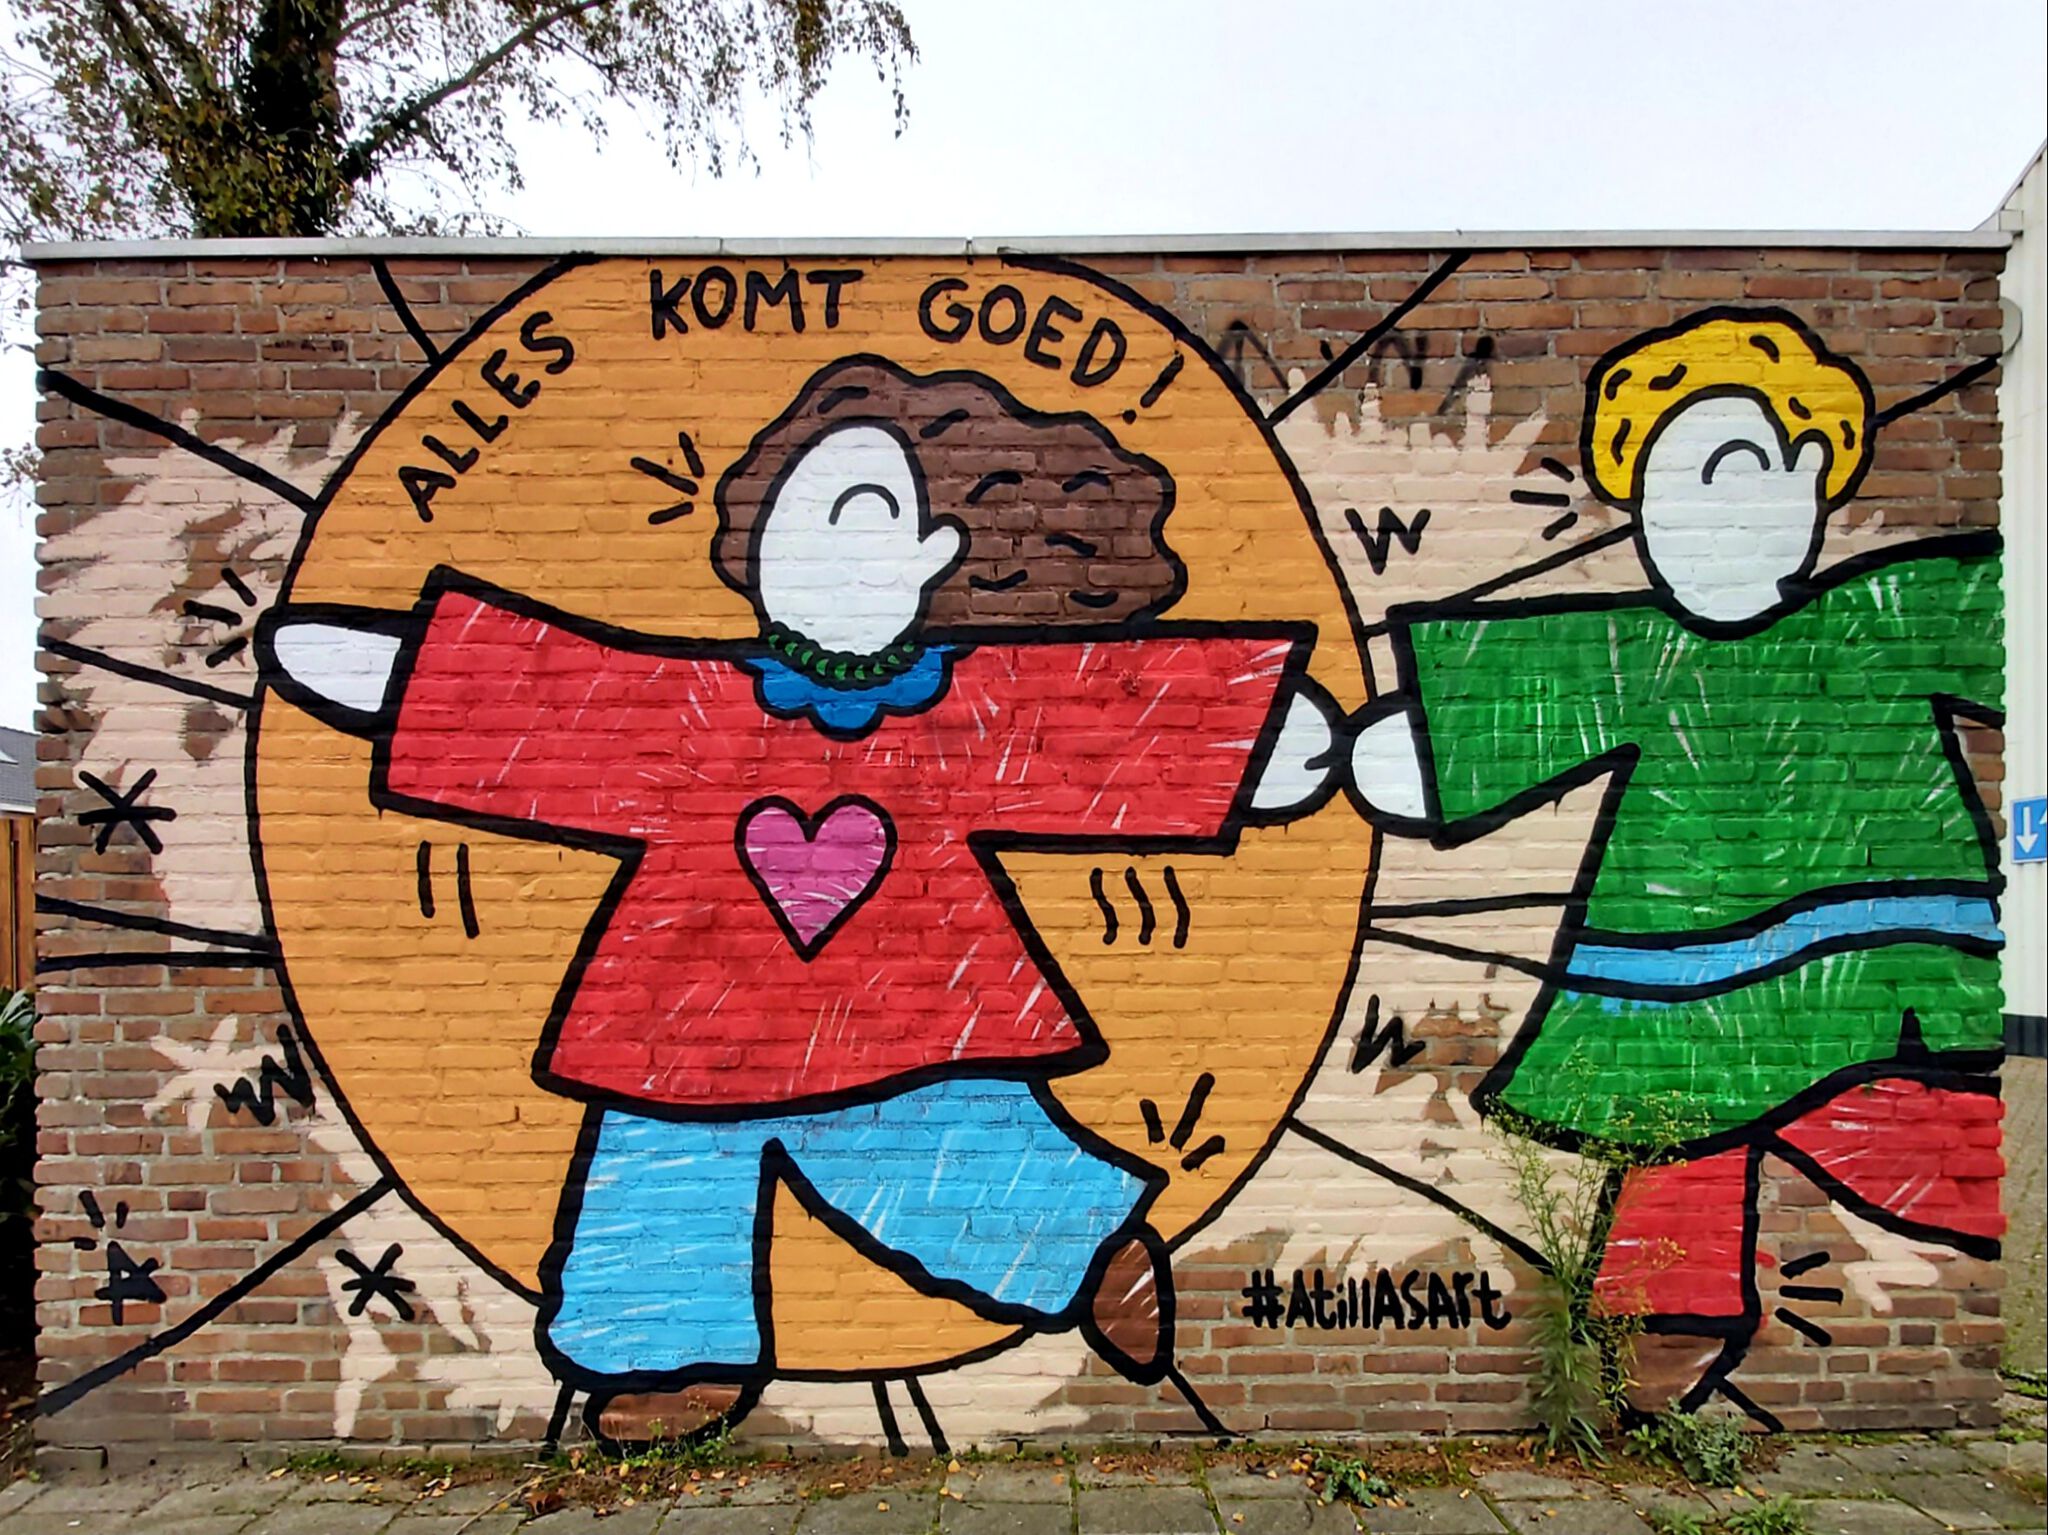 Atilla's Art&mdash;"Alles komt goed" (Everything will be all right)